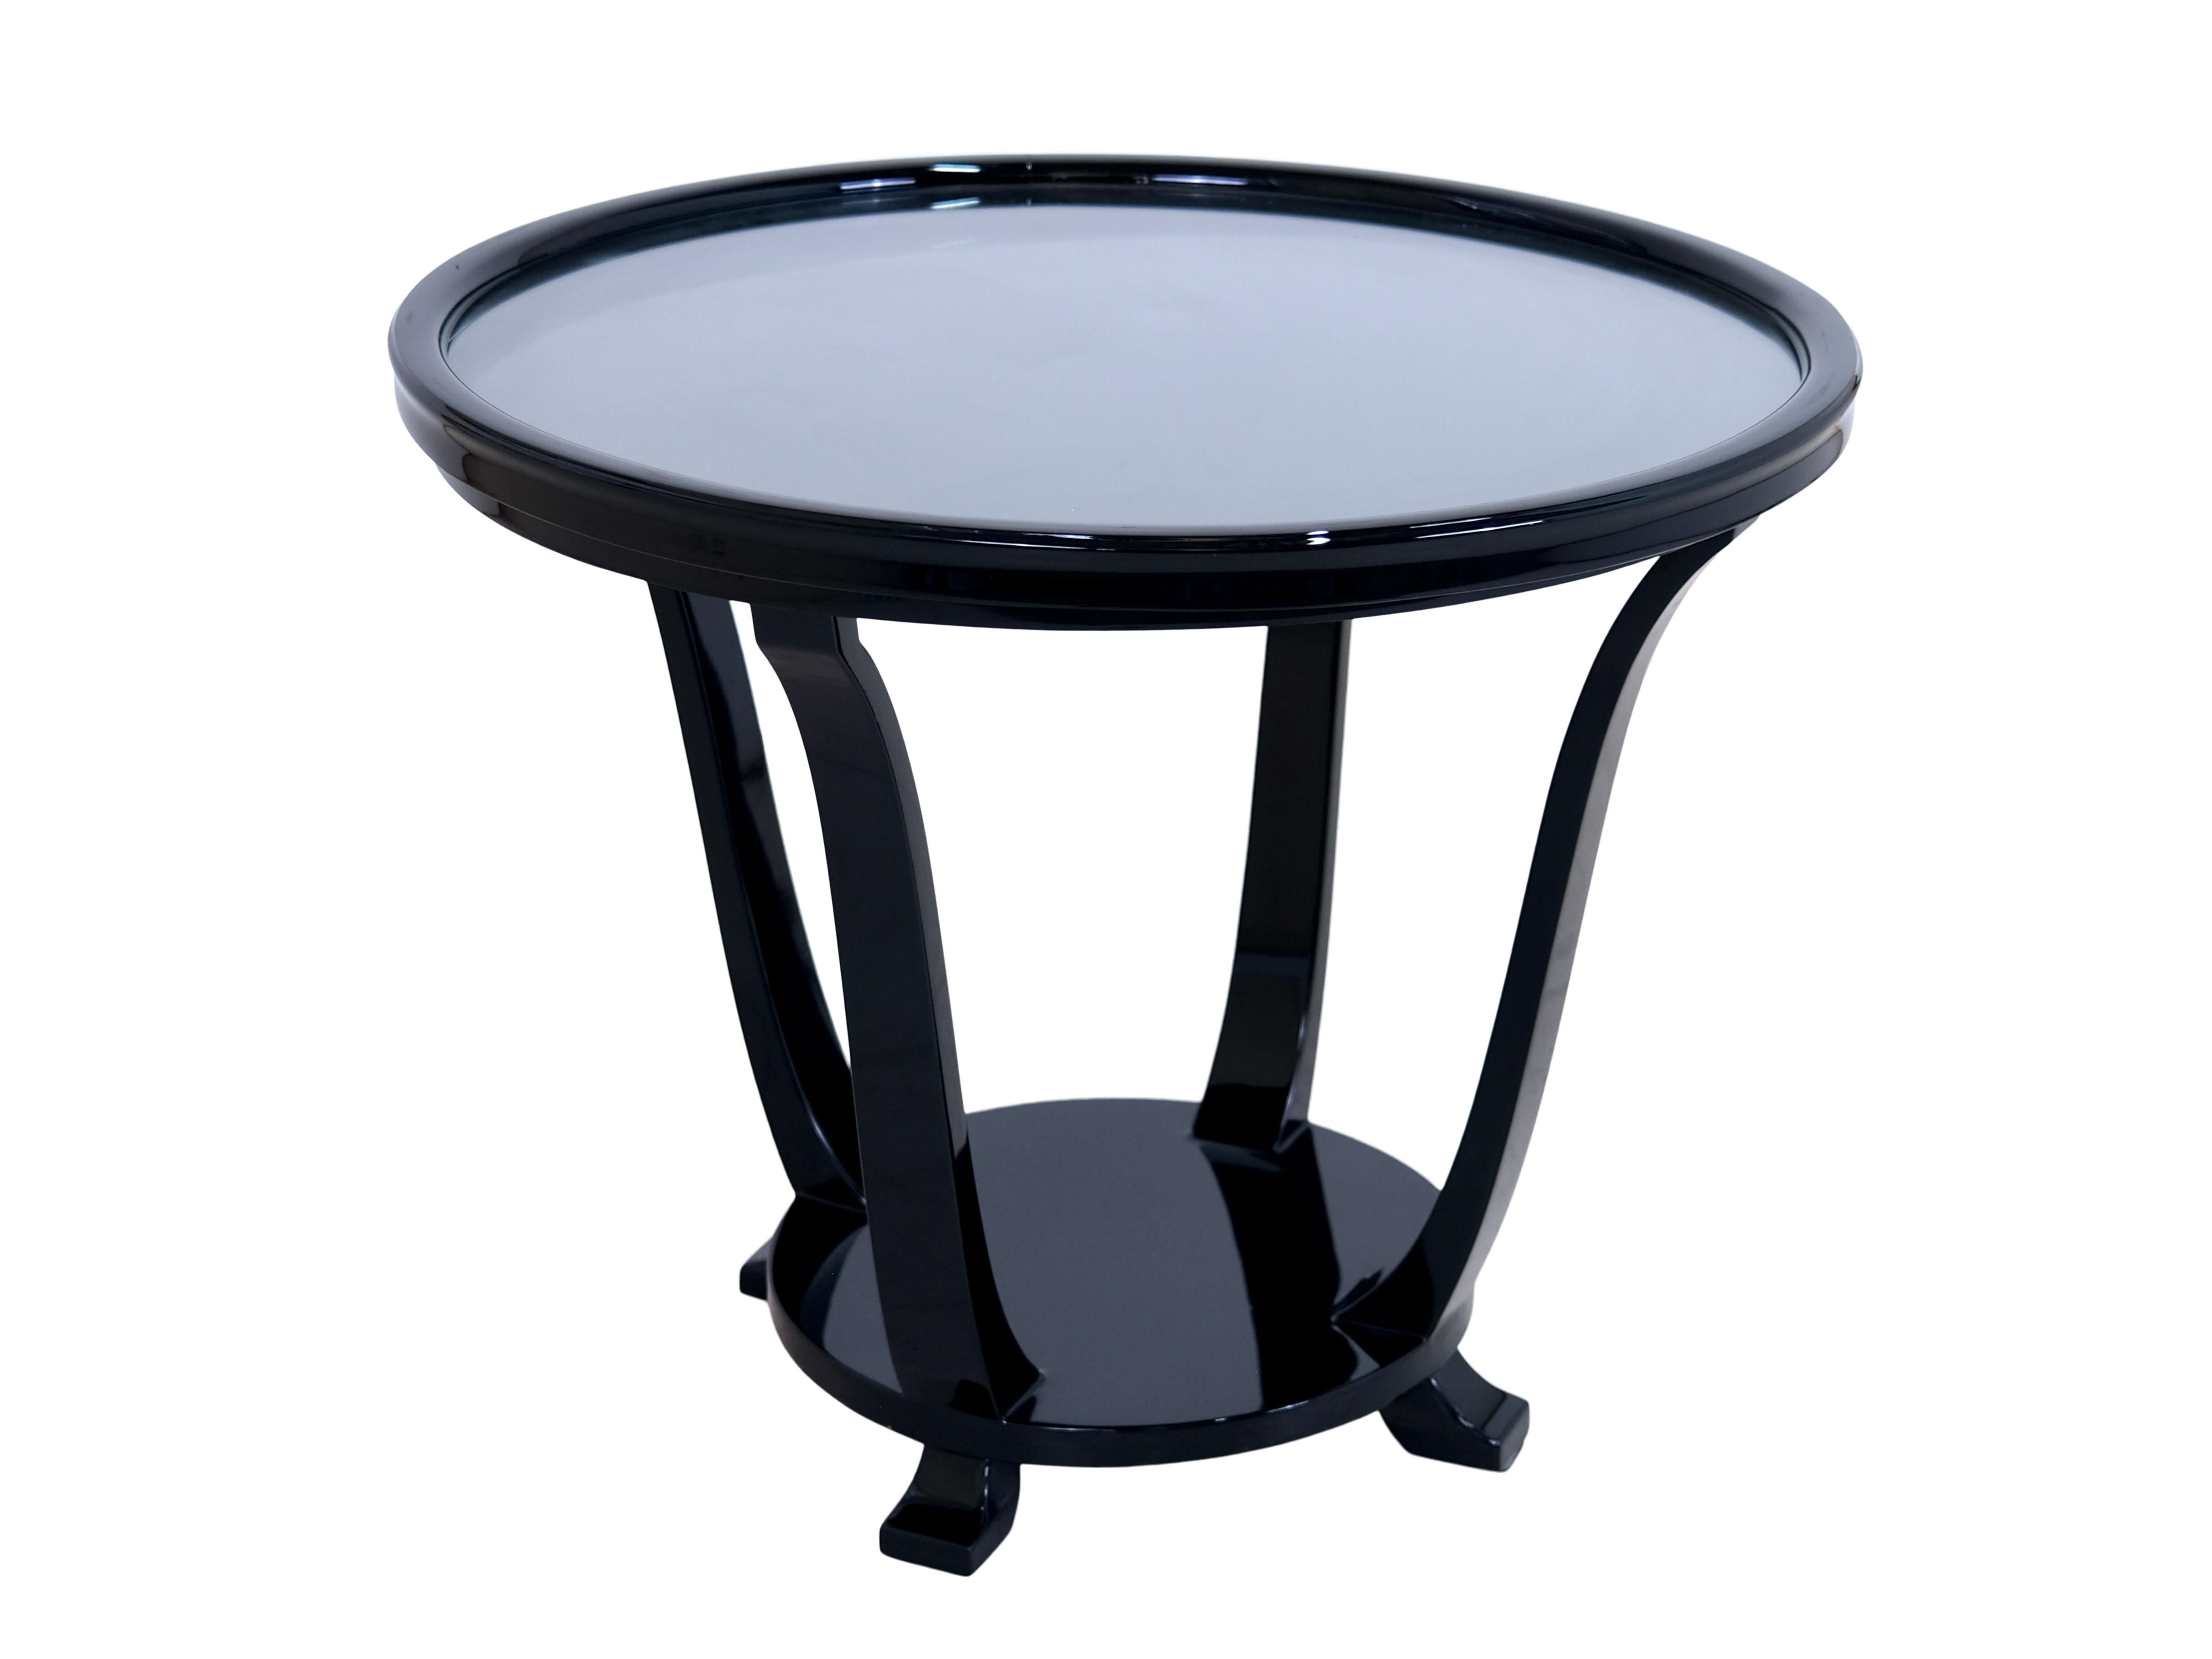 Blackened 1930s French Black Piano Lacquer Art Deco Side Table with Removable Glass Tray